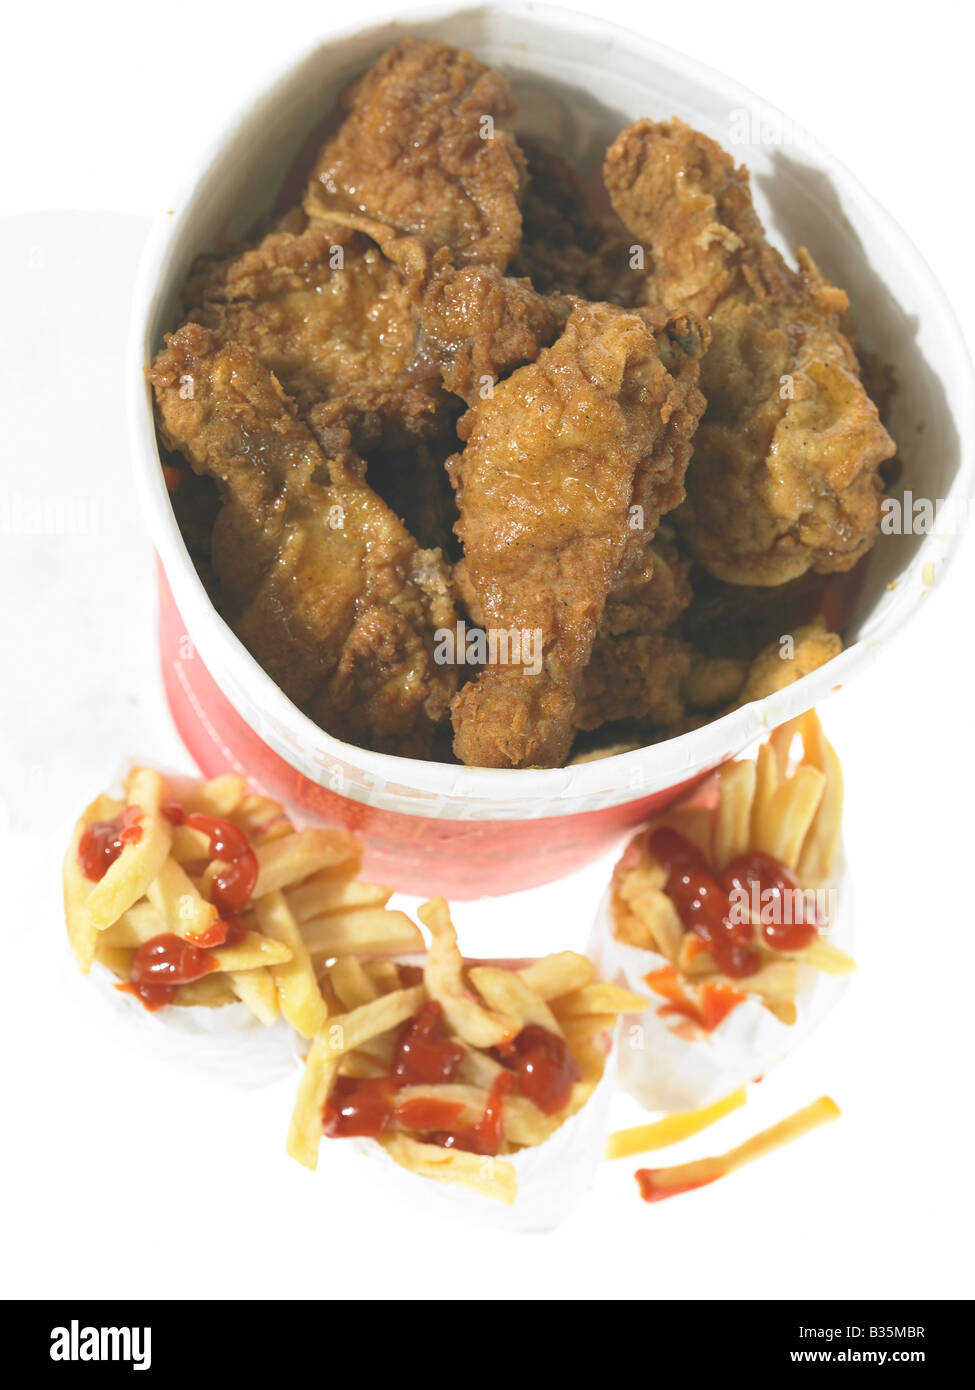 Bucket of Fried Chicken and French fried Chips in take out packaging Stock Photo